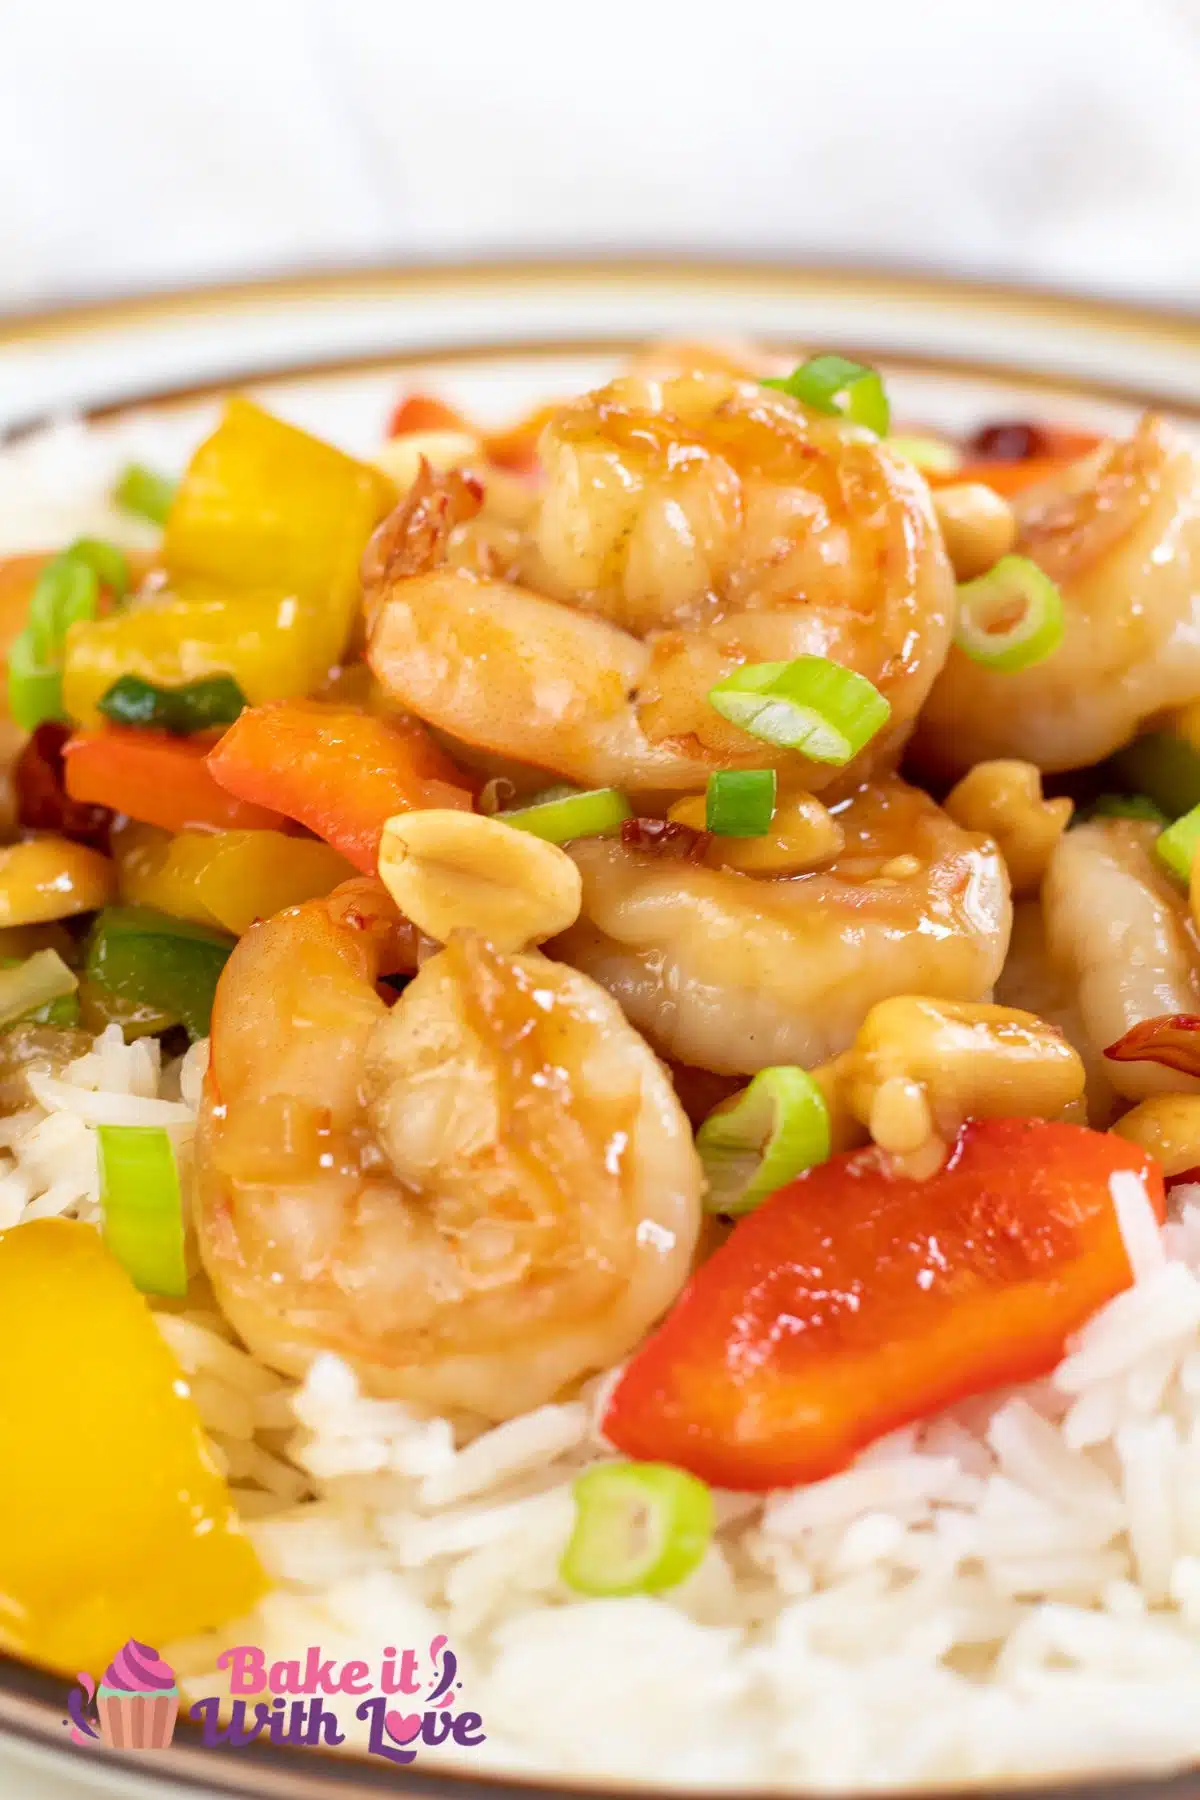 Tall close up image of kung pao shrimp on a plate with white rice.